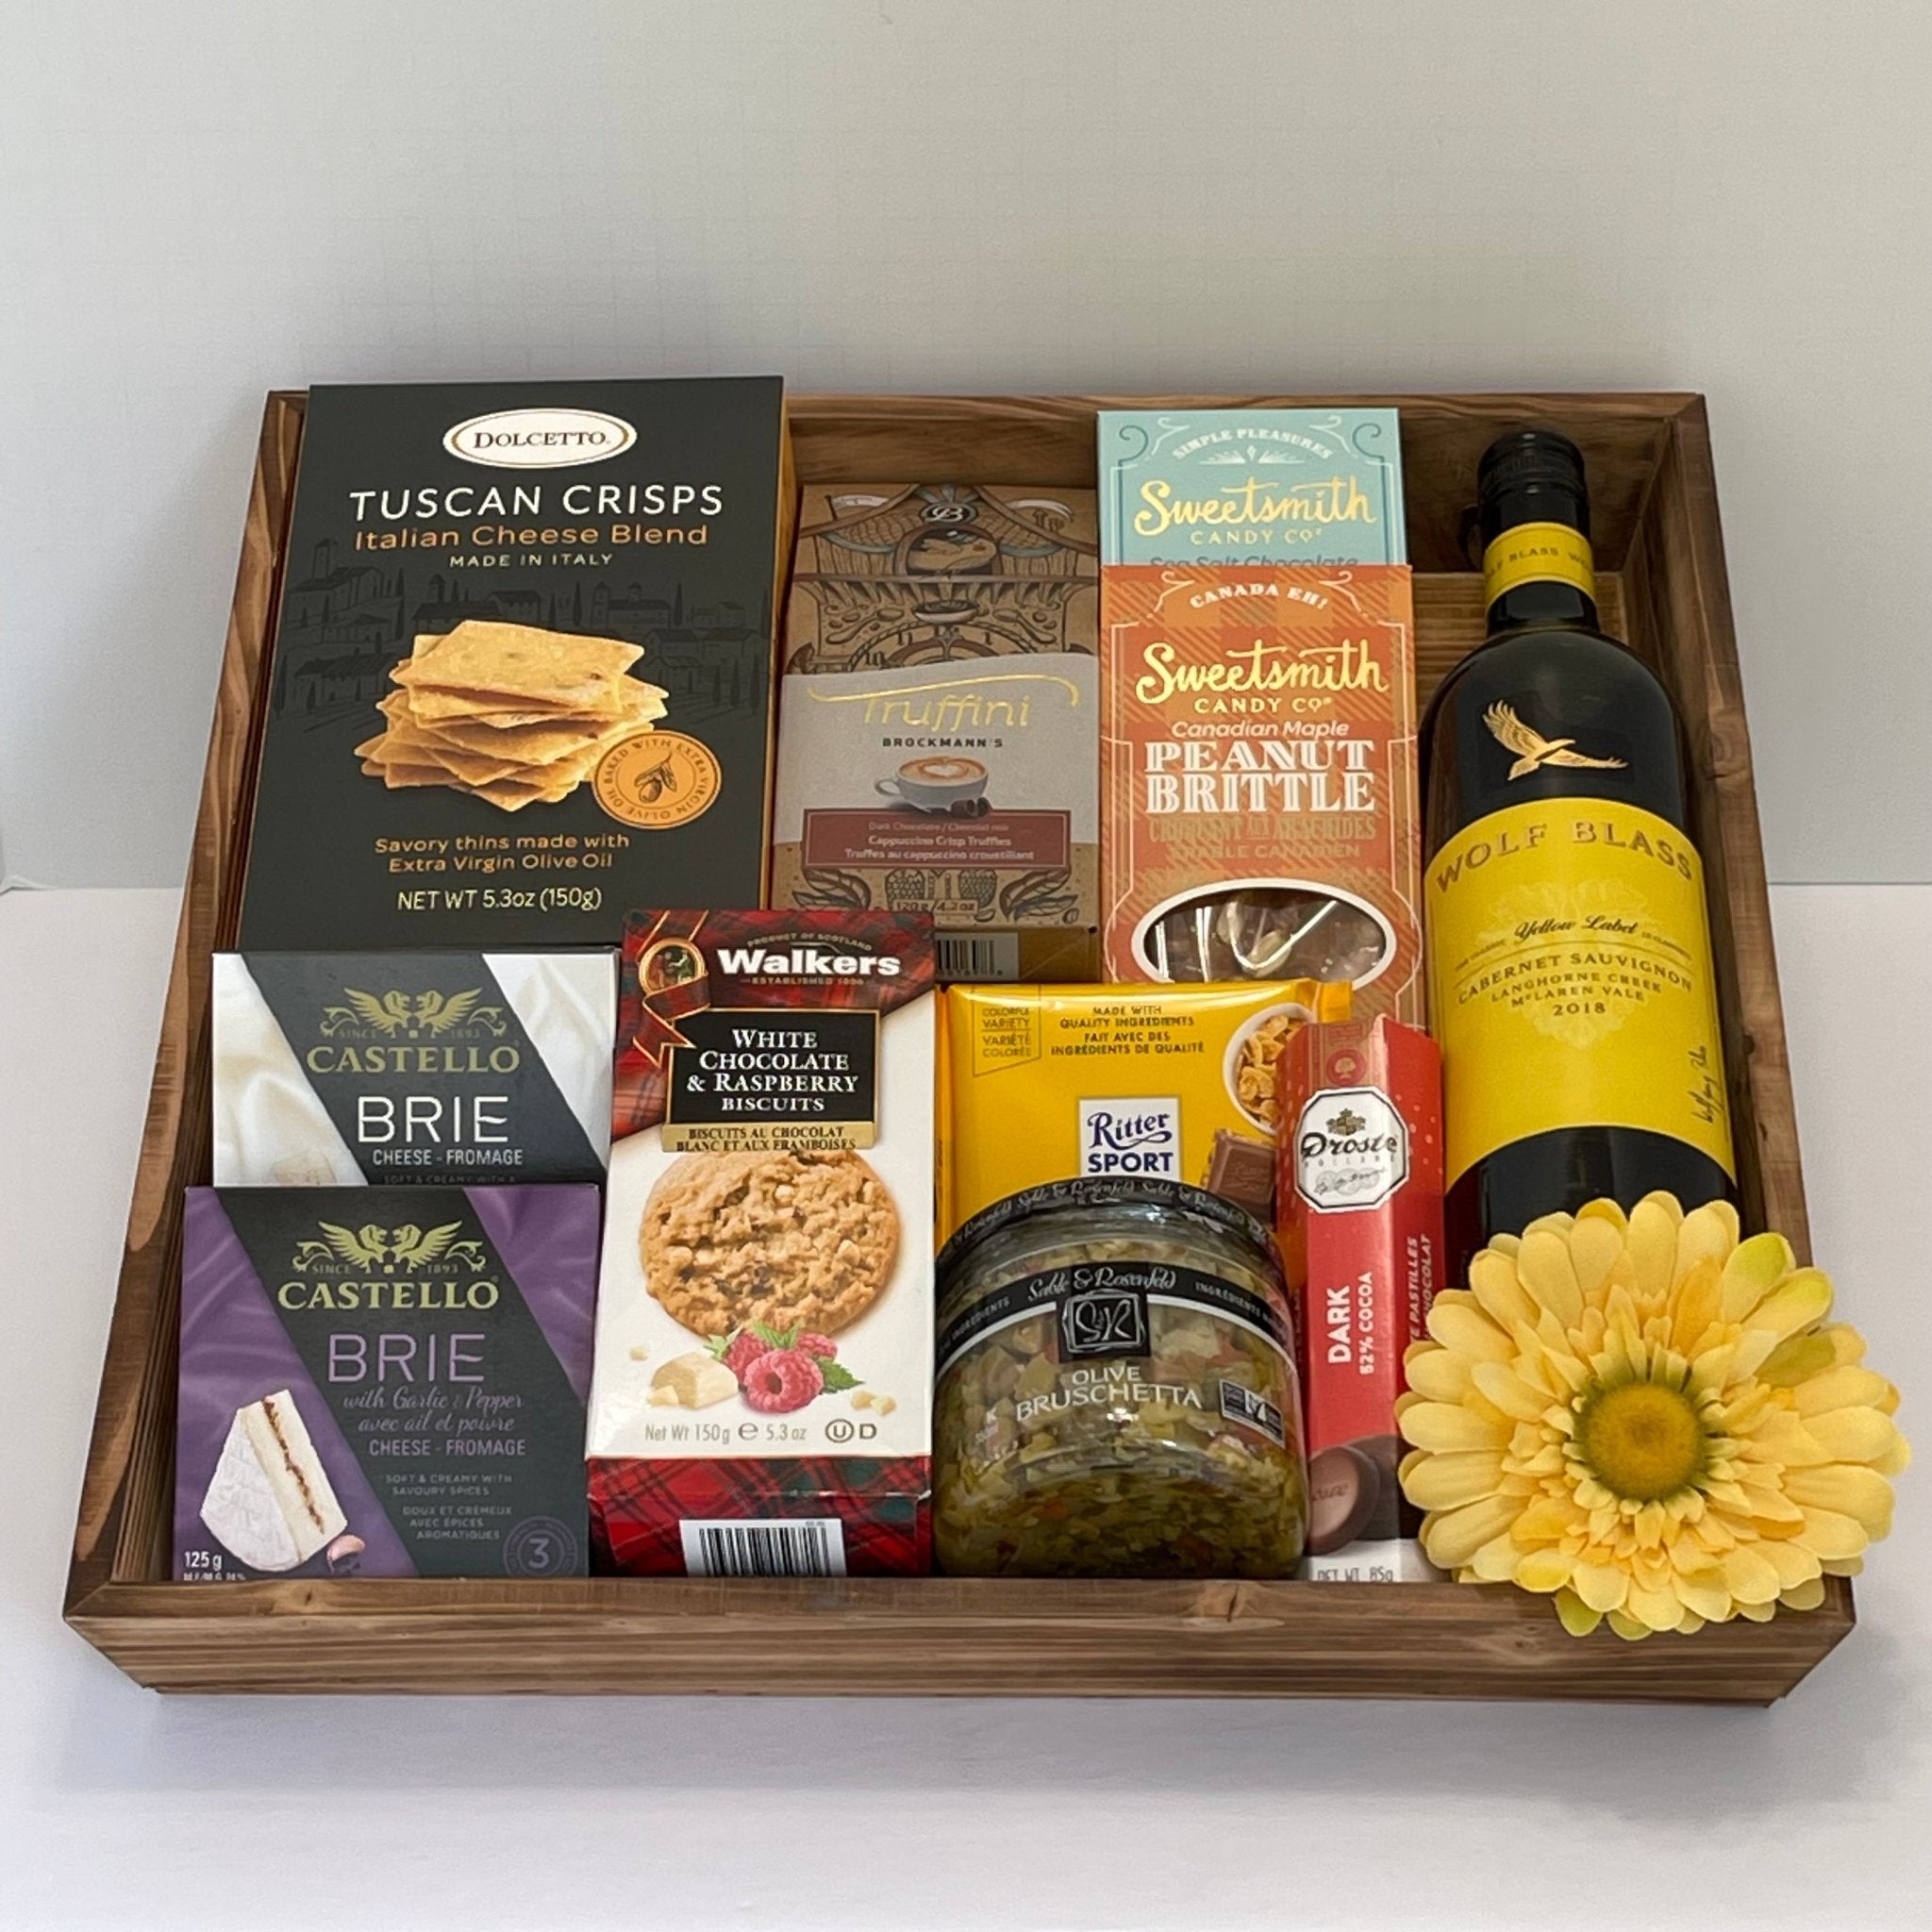 A made in Calgary gift basket made in a large wooden tray and includes a bottle of wine and tasty gourmet snacks to celebrate an occasion such as anniversary, birthday, housewarming.